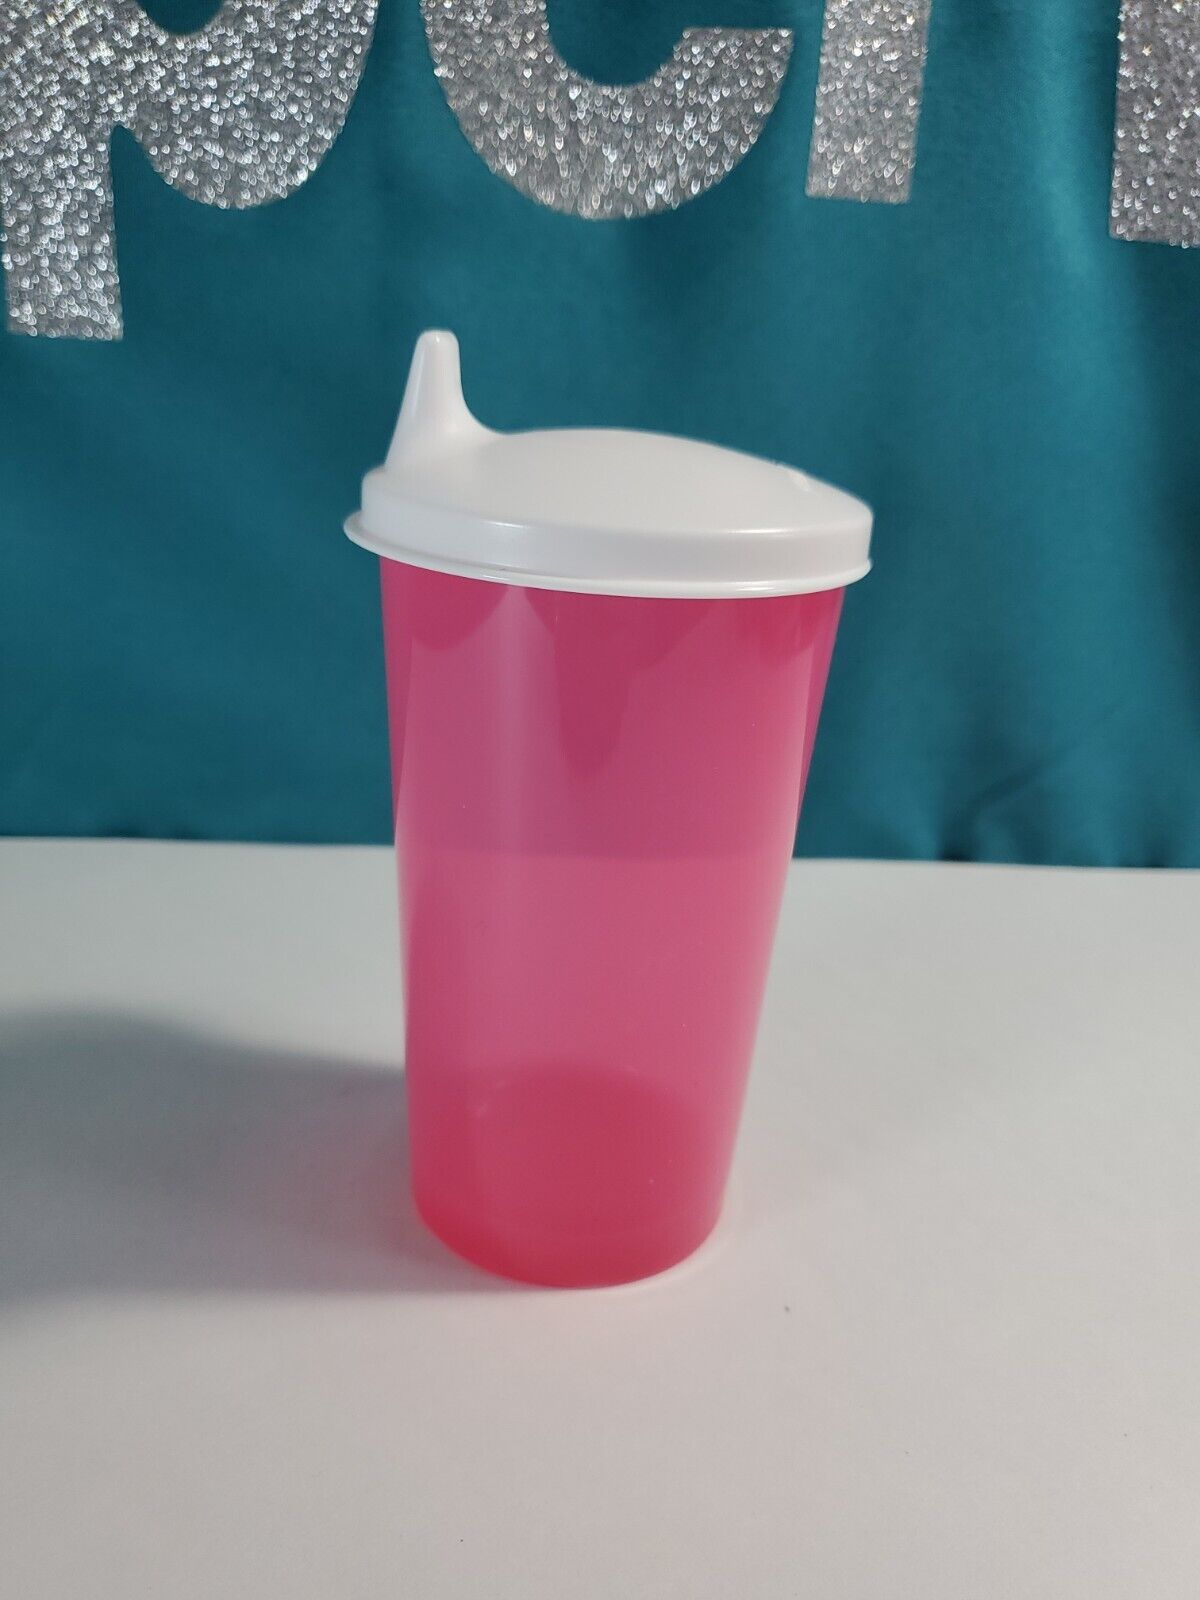 Tupperware Kids Tumbler Pink Cup With White Dome Sippy Seal 11oz Sipper cup sale